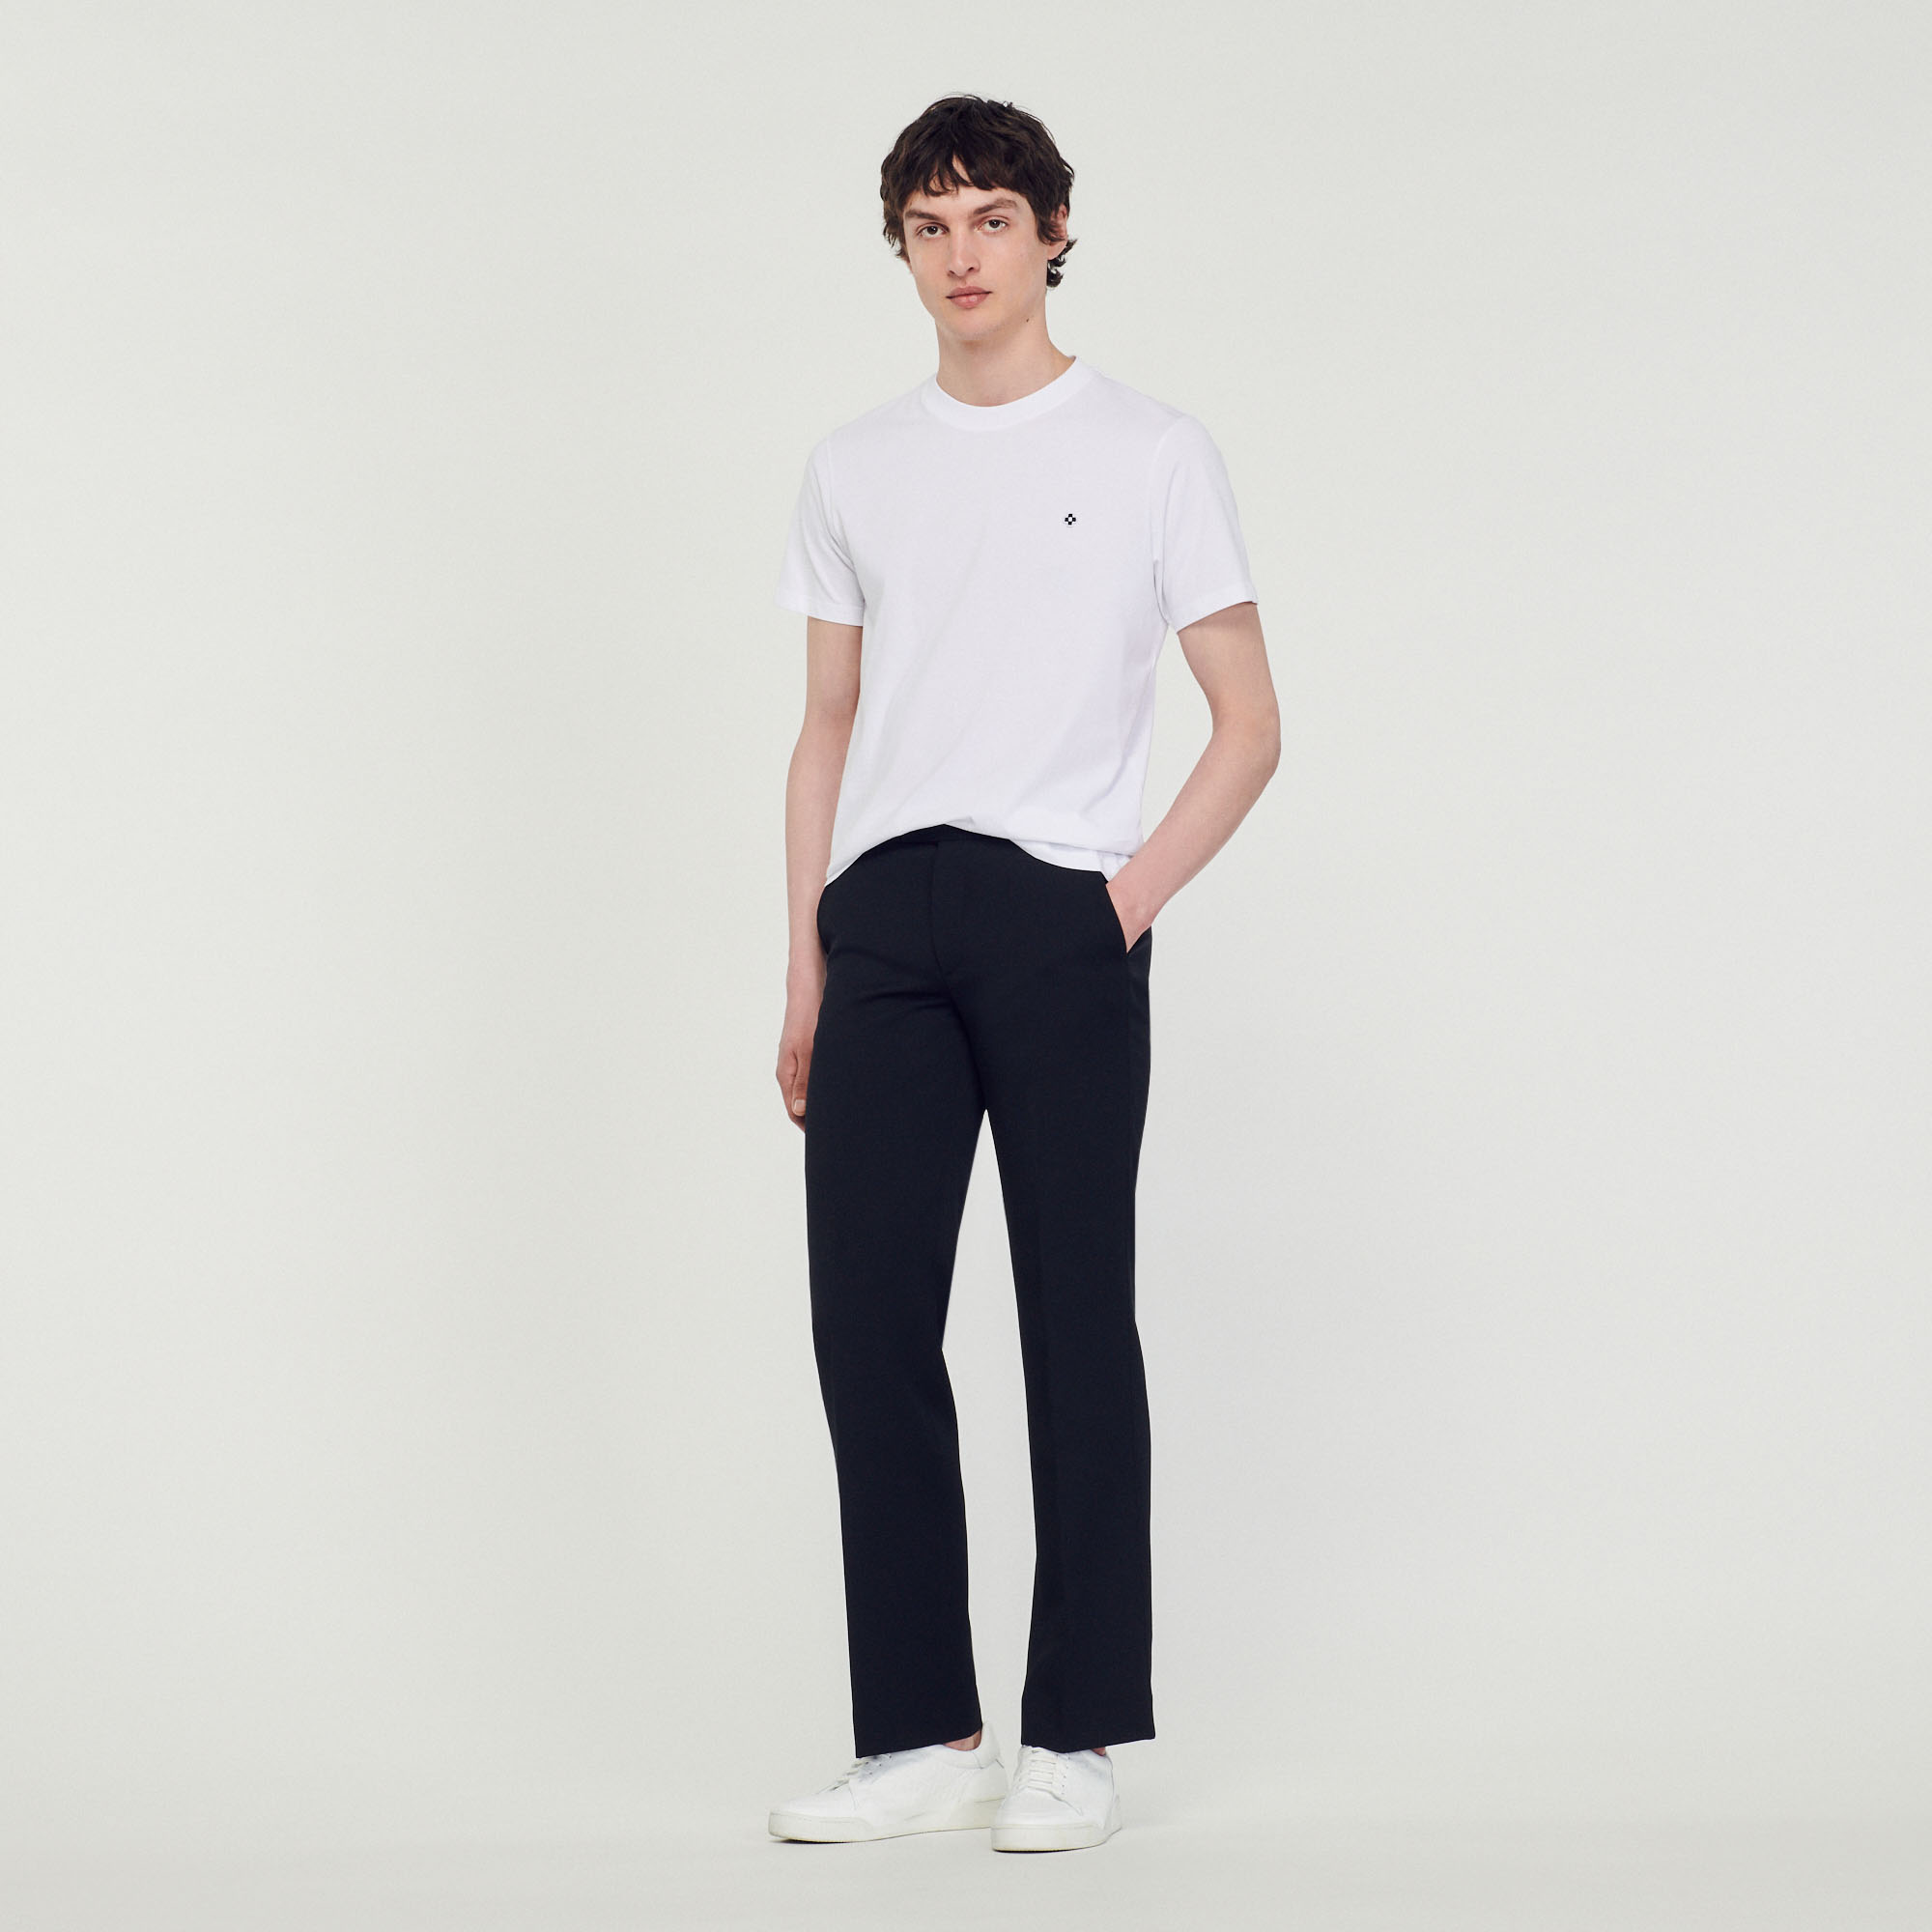 Sandro cotton T-shirt with Square Cross patch